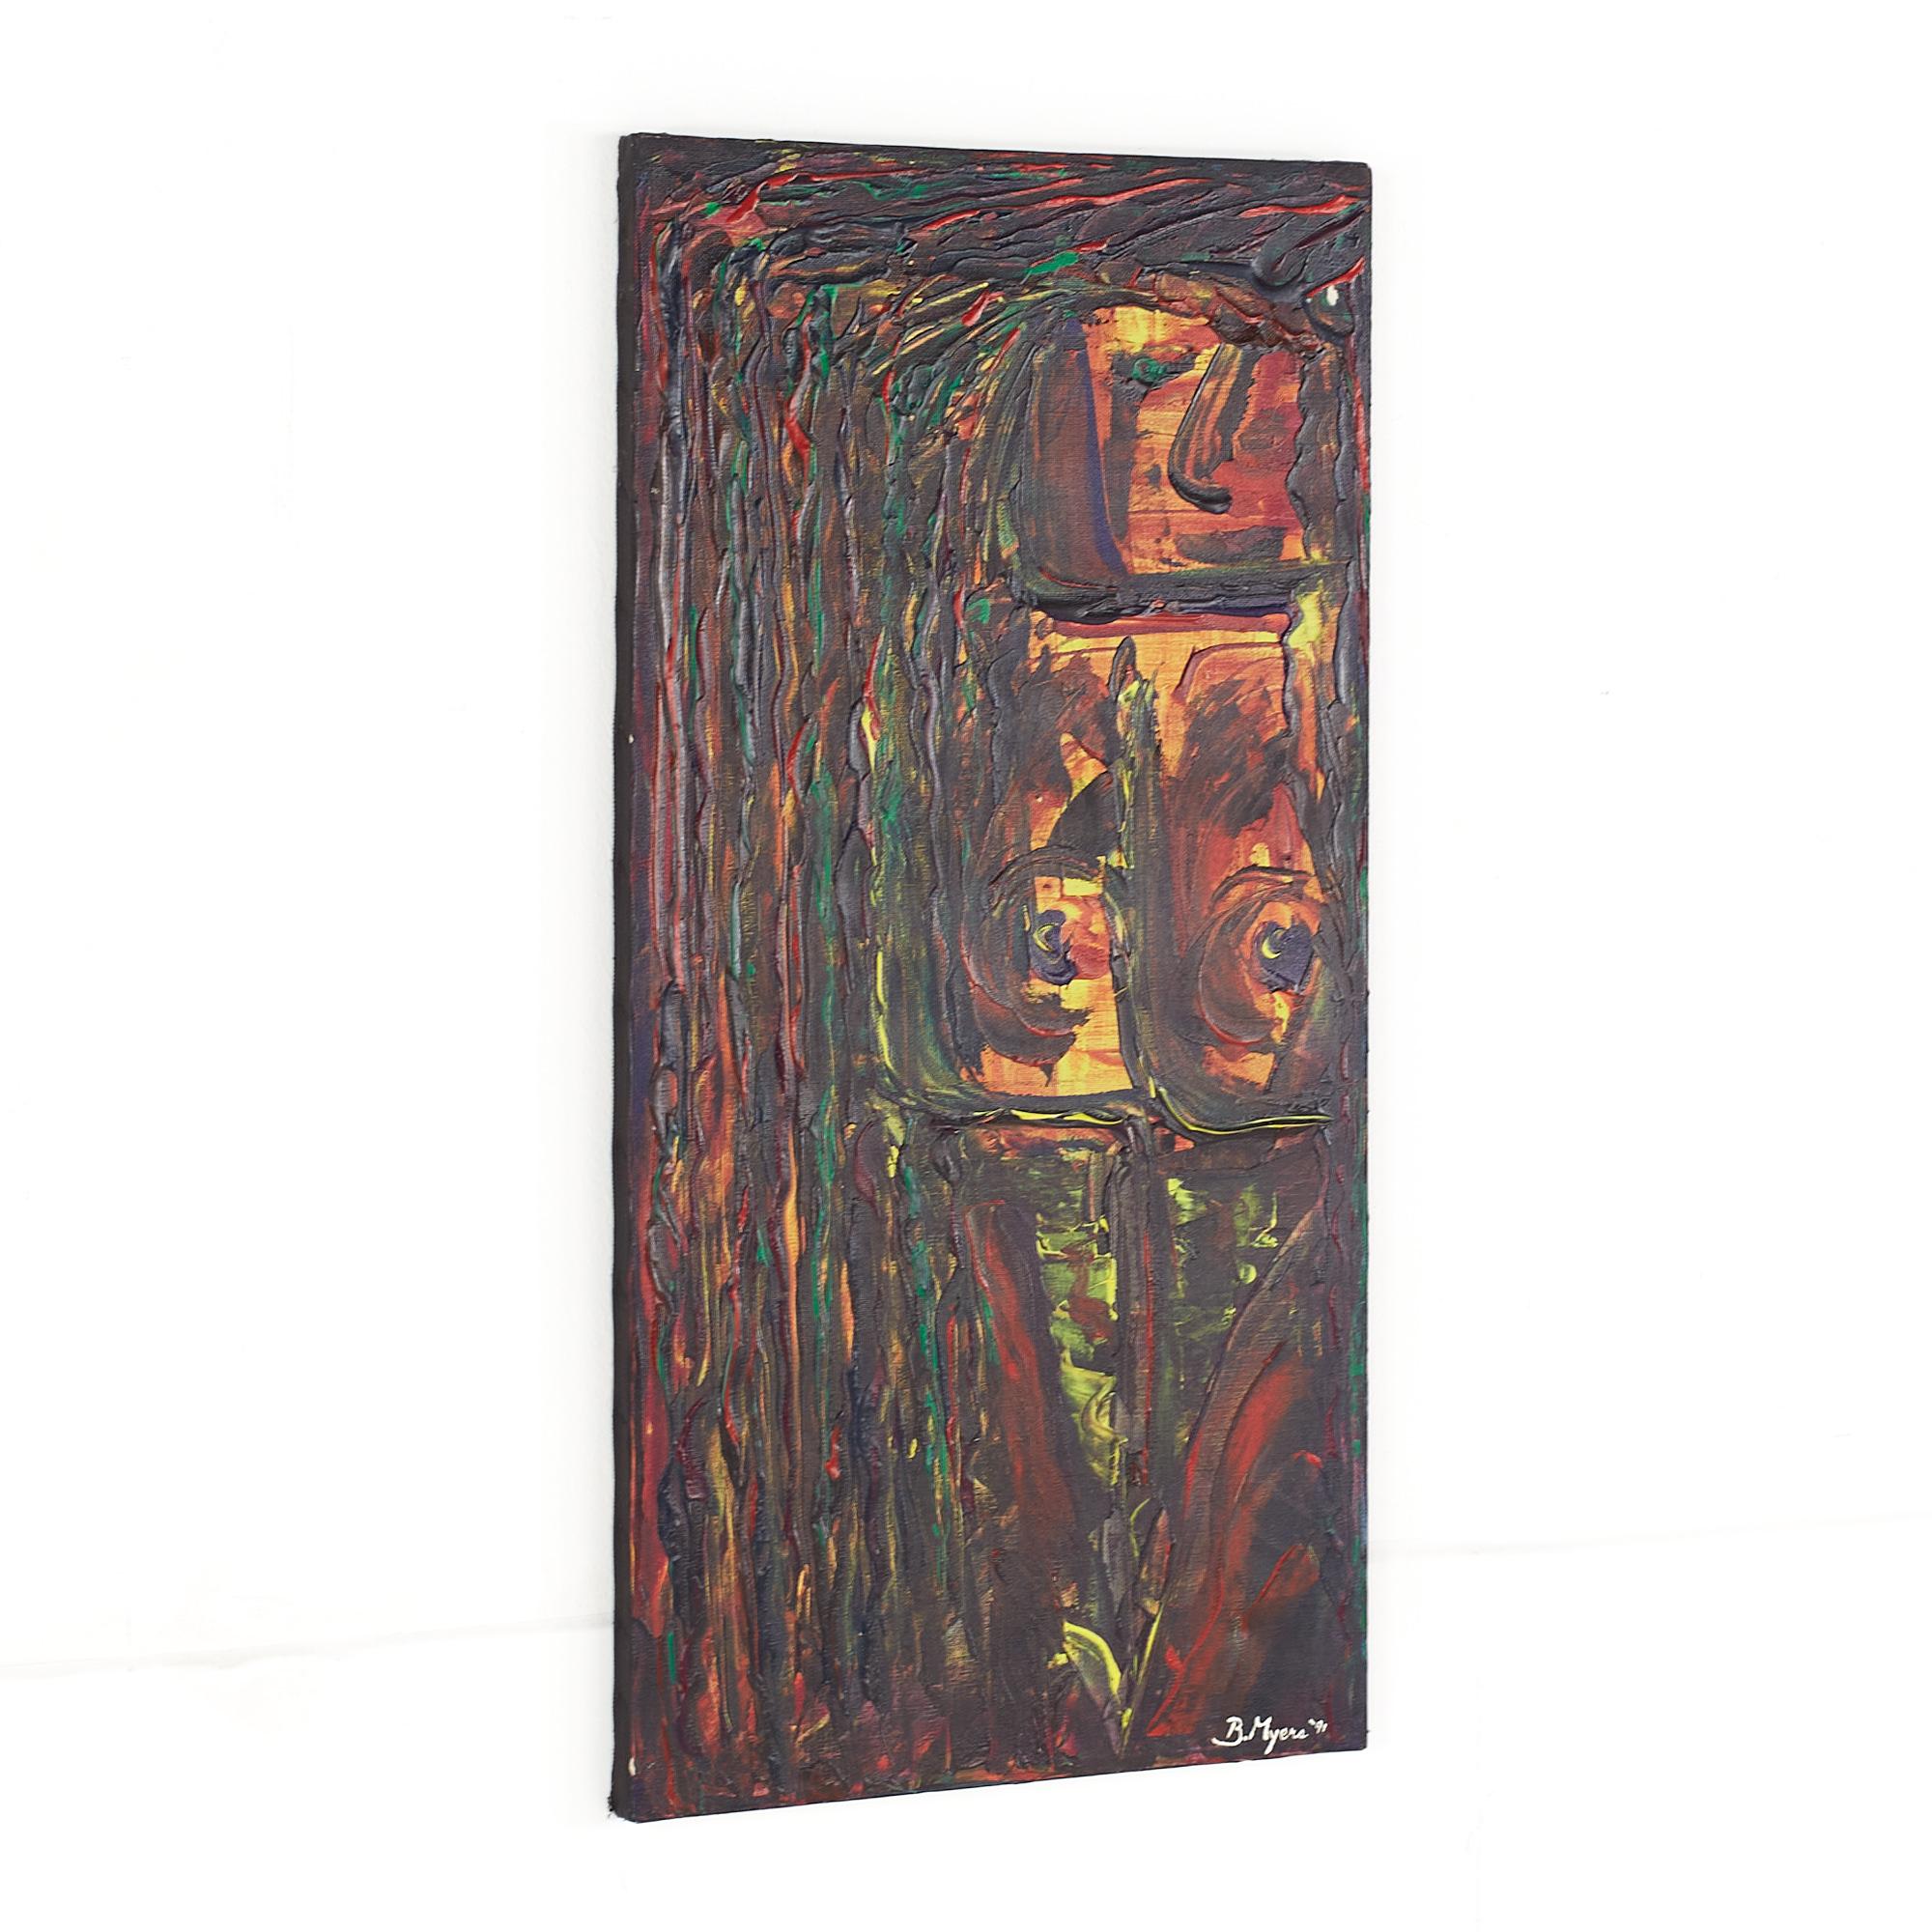 Bruce Myers mid-century signed abstract original oil on canvas.

This painting measures: 15 wide x .75 deep x 30 inches high.

This painting is in good vintage condition.

We take our photos in a controlled lighting studio to show as much